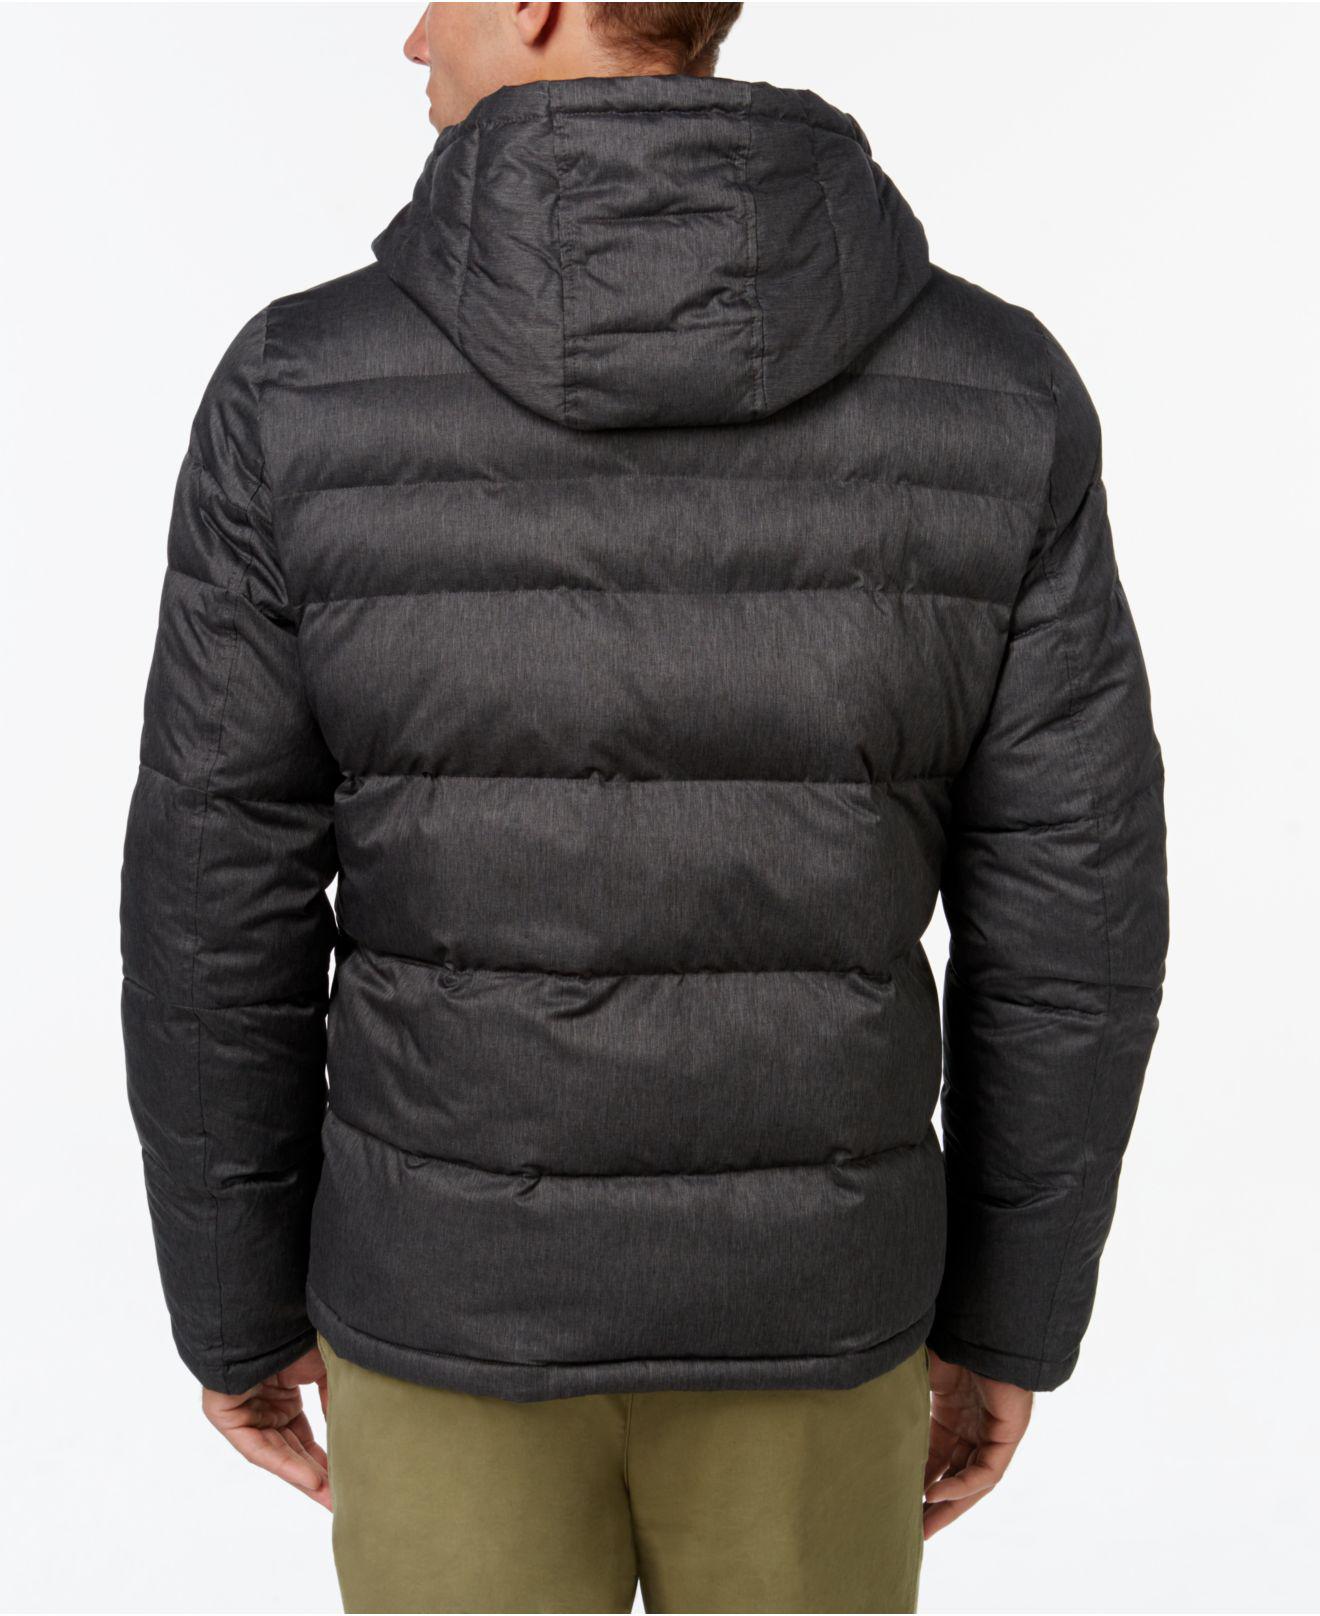 Lyst - Tommy Hilfiger Men's Classic Hooded Puffer Jacket in Gray for Men